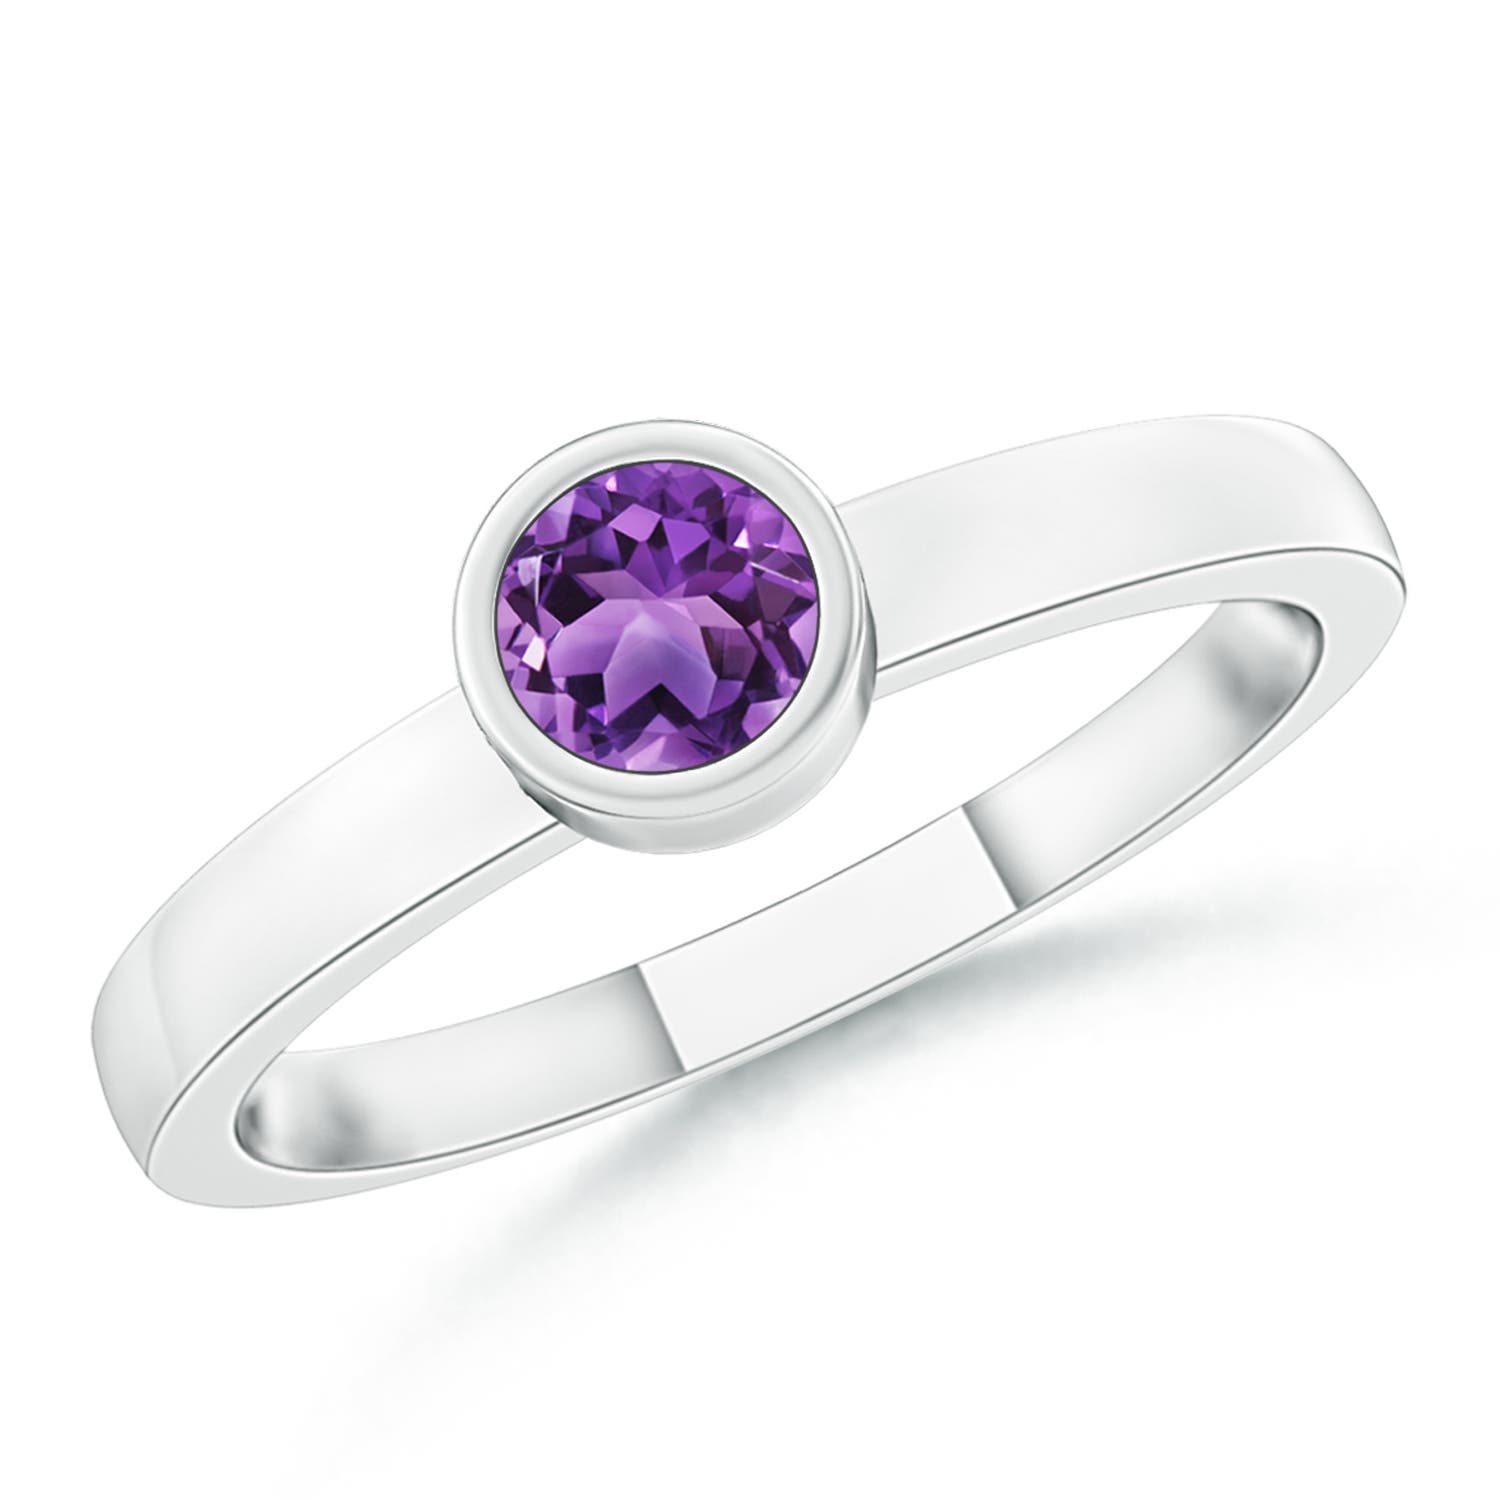 AA - Amethyst / 0.16 CT / 14 KT White Gold